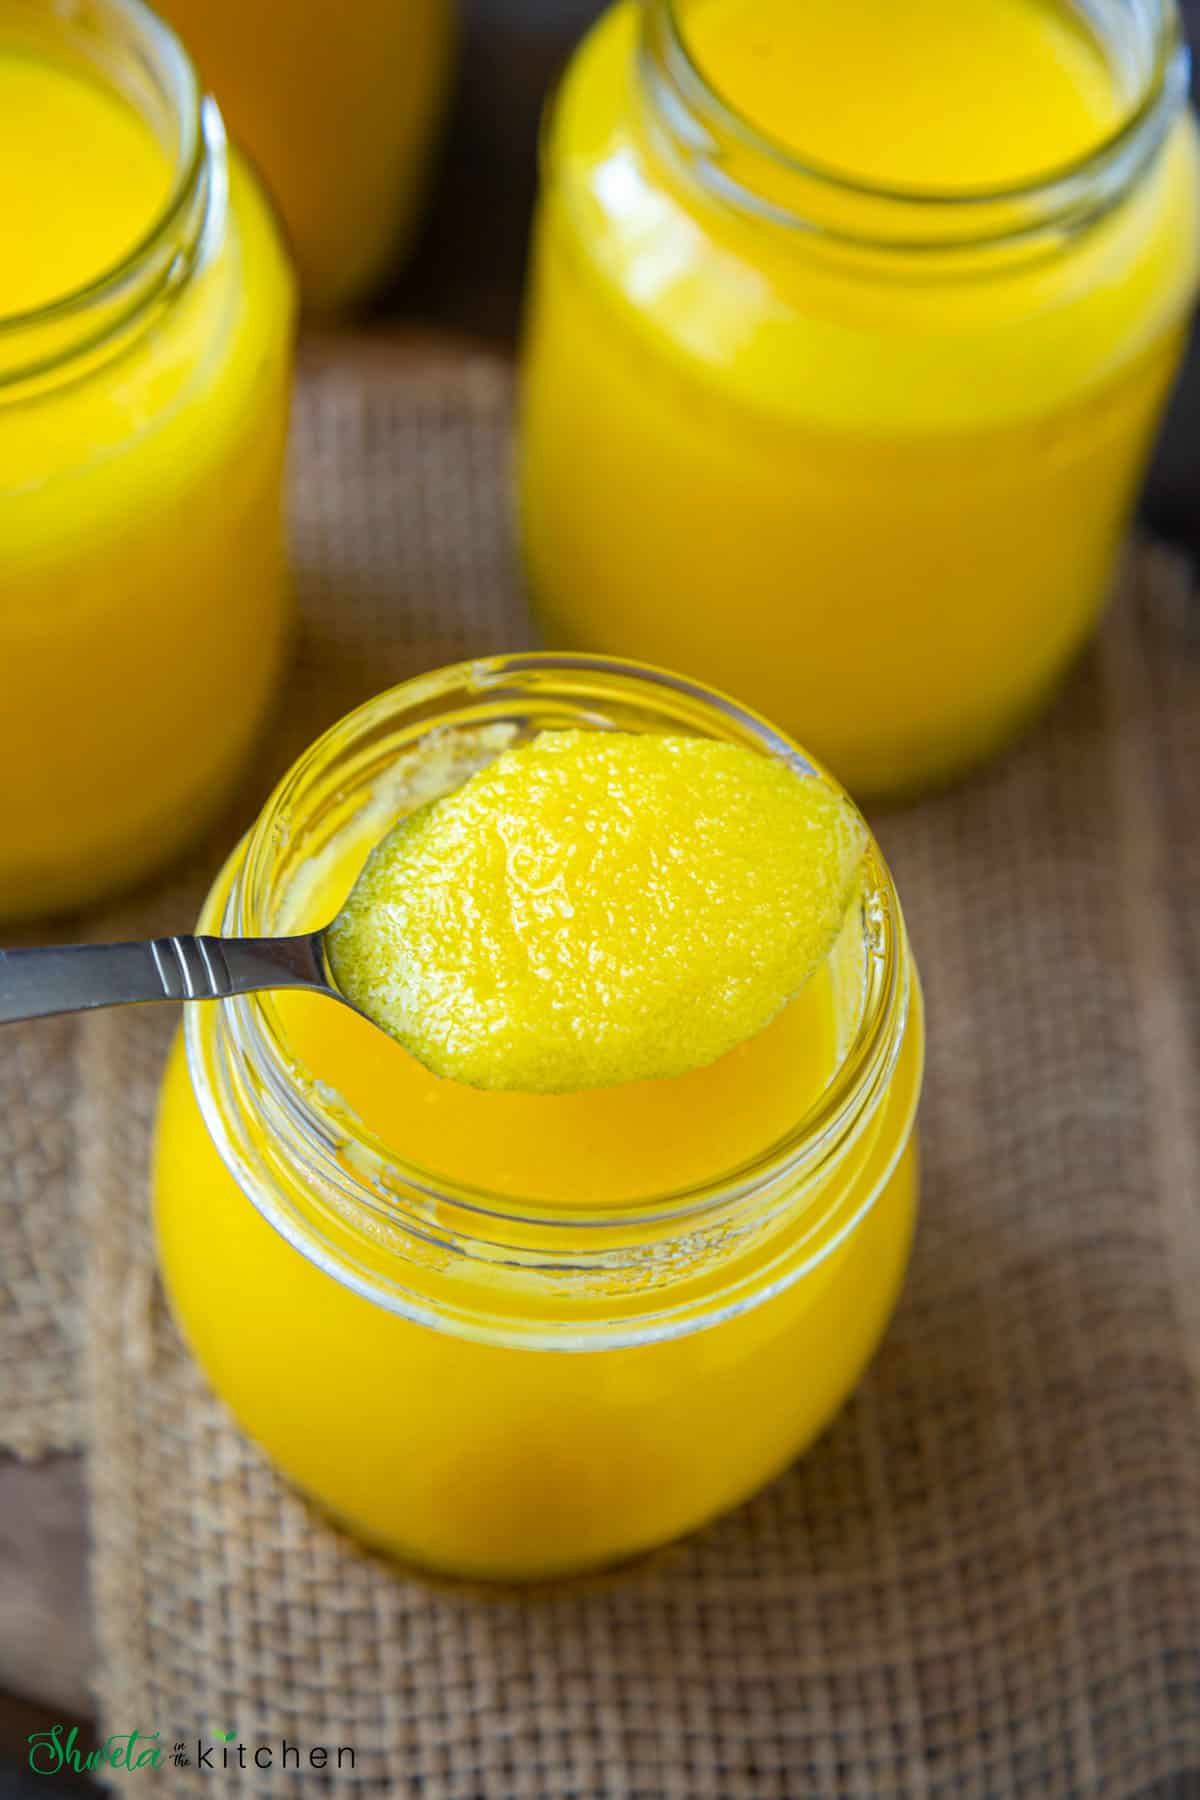 Spoonful of homemade ghee scooped out of jar